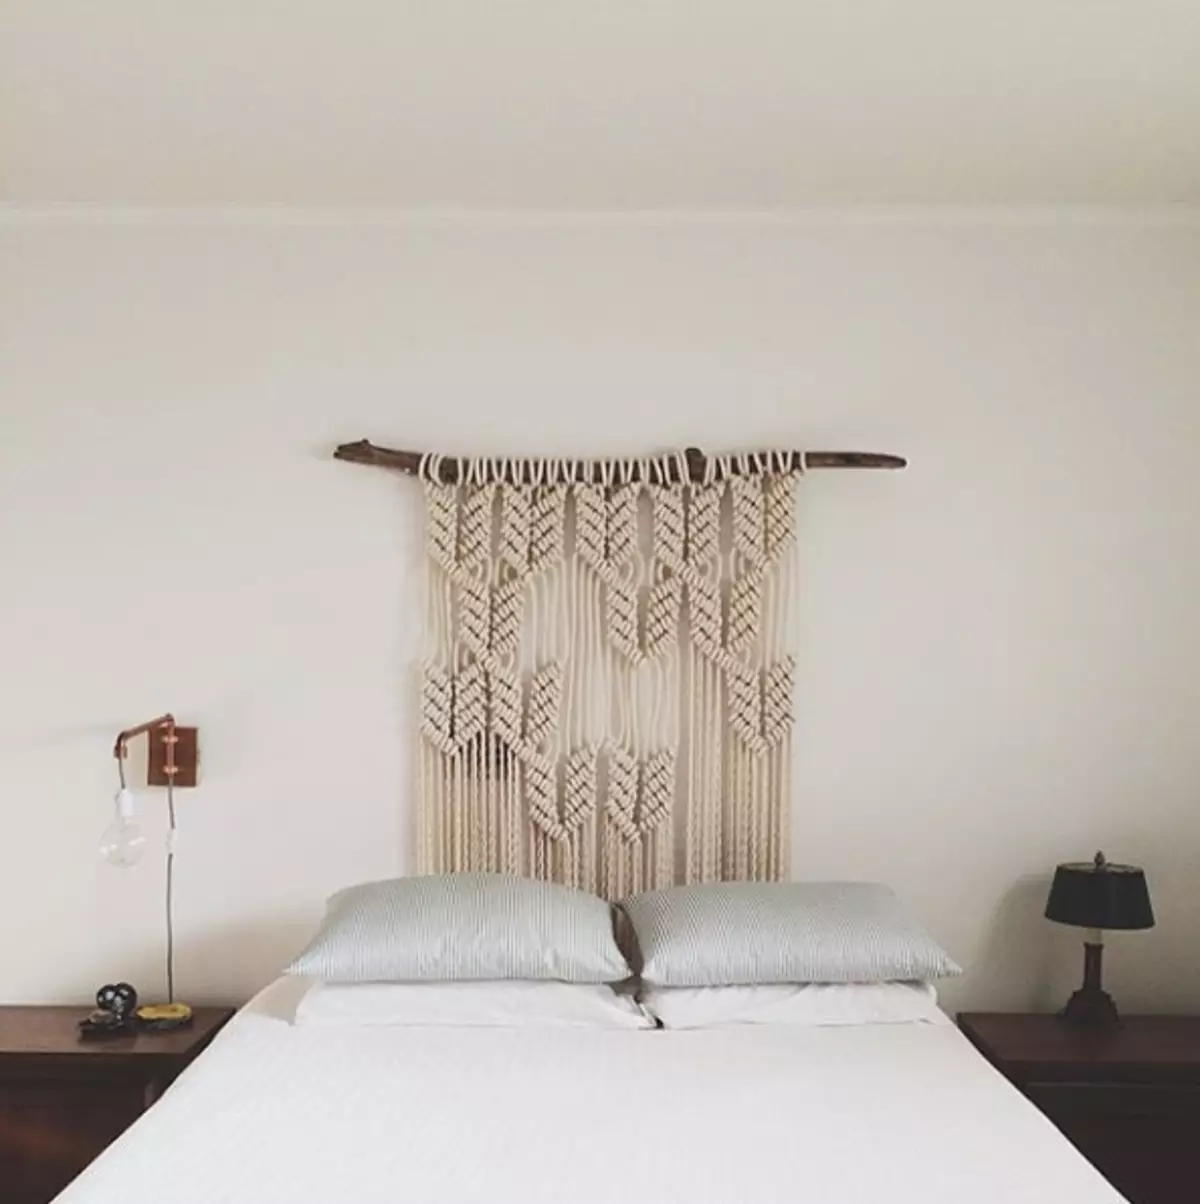 How to make a headboard with your own hands? 9865_81